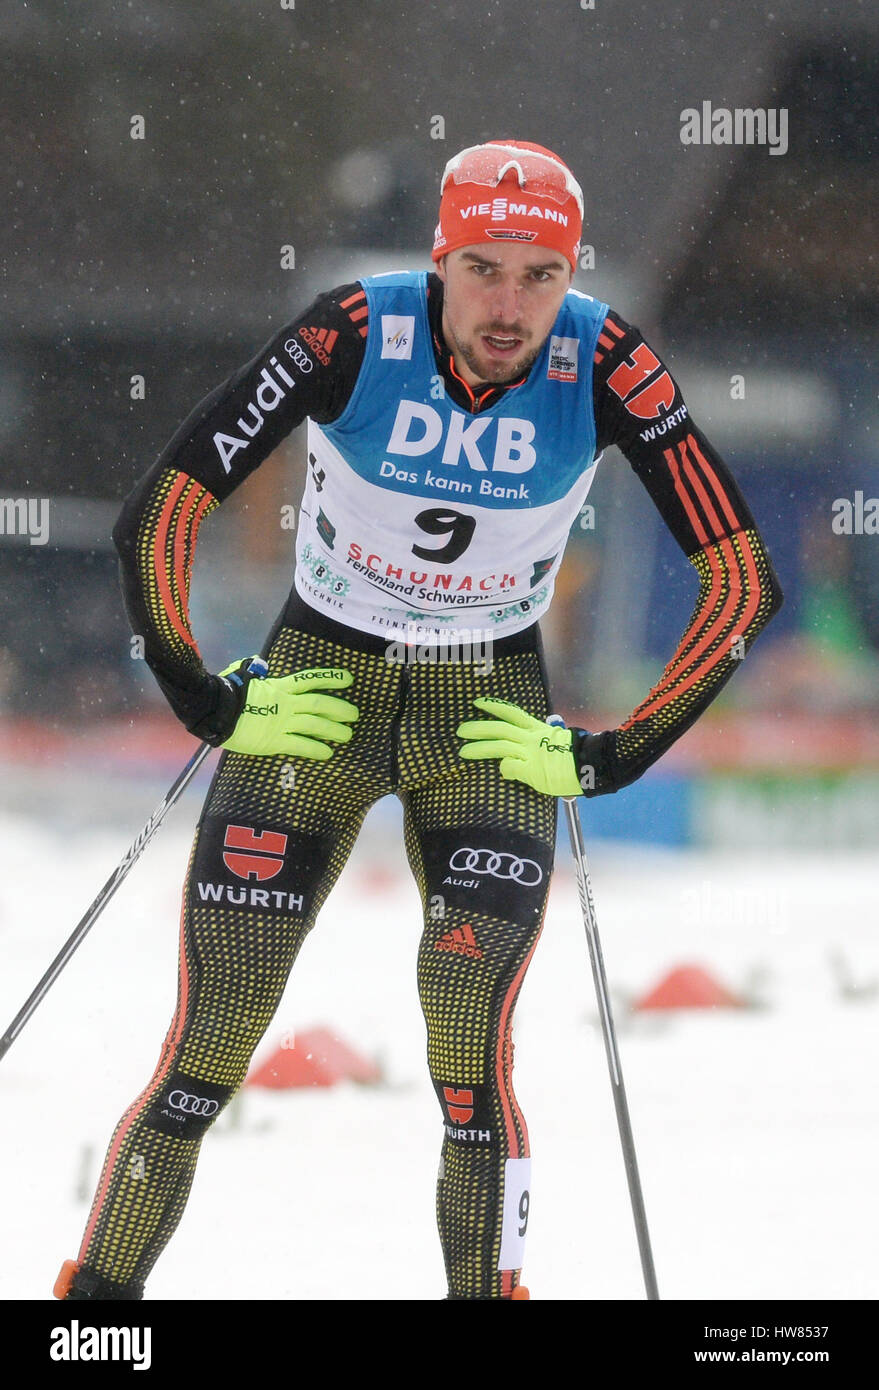 Schoenach, Germany. 18th Mar, 2017. Johannes Rydzek from Germany arrives at the finish line at third place after falling shortly before reaching the end during the men's single on the large hill/10km at the Nordic Combined World Cup in Schoenach, Germany, 18 March 2017. Photo: Patrick Seeger/dpa/Alamy Live News Stock Photo